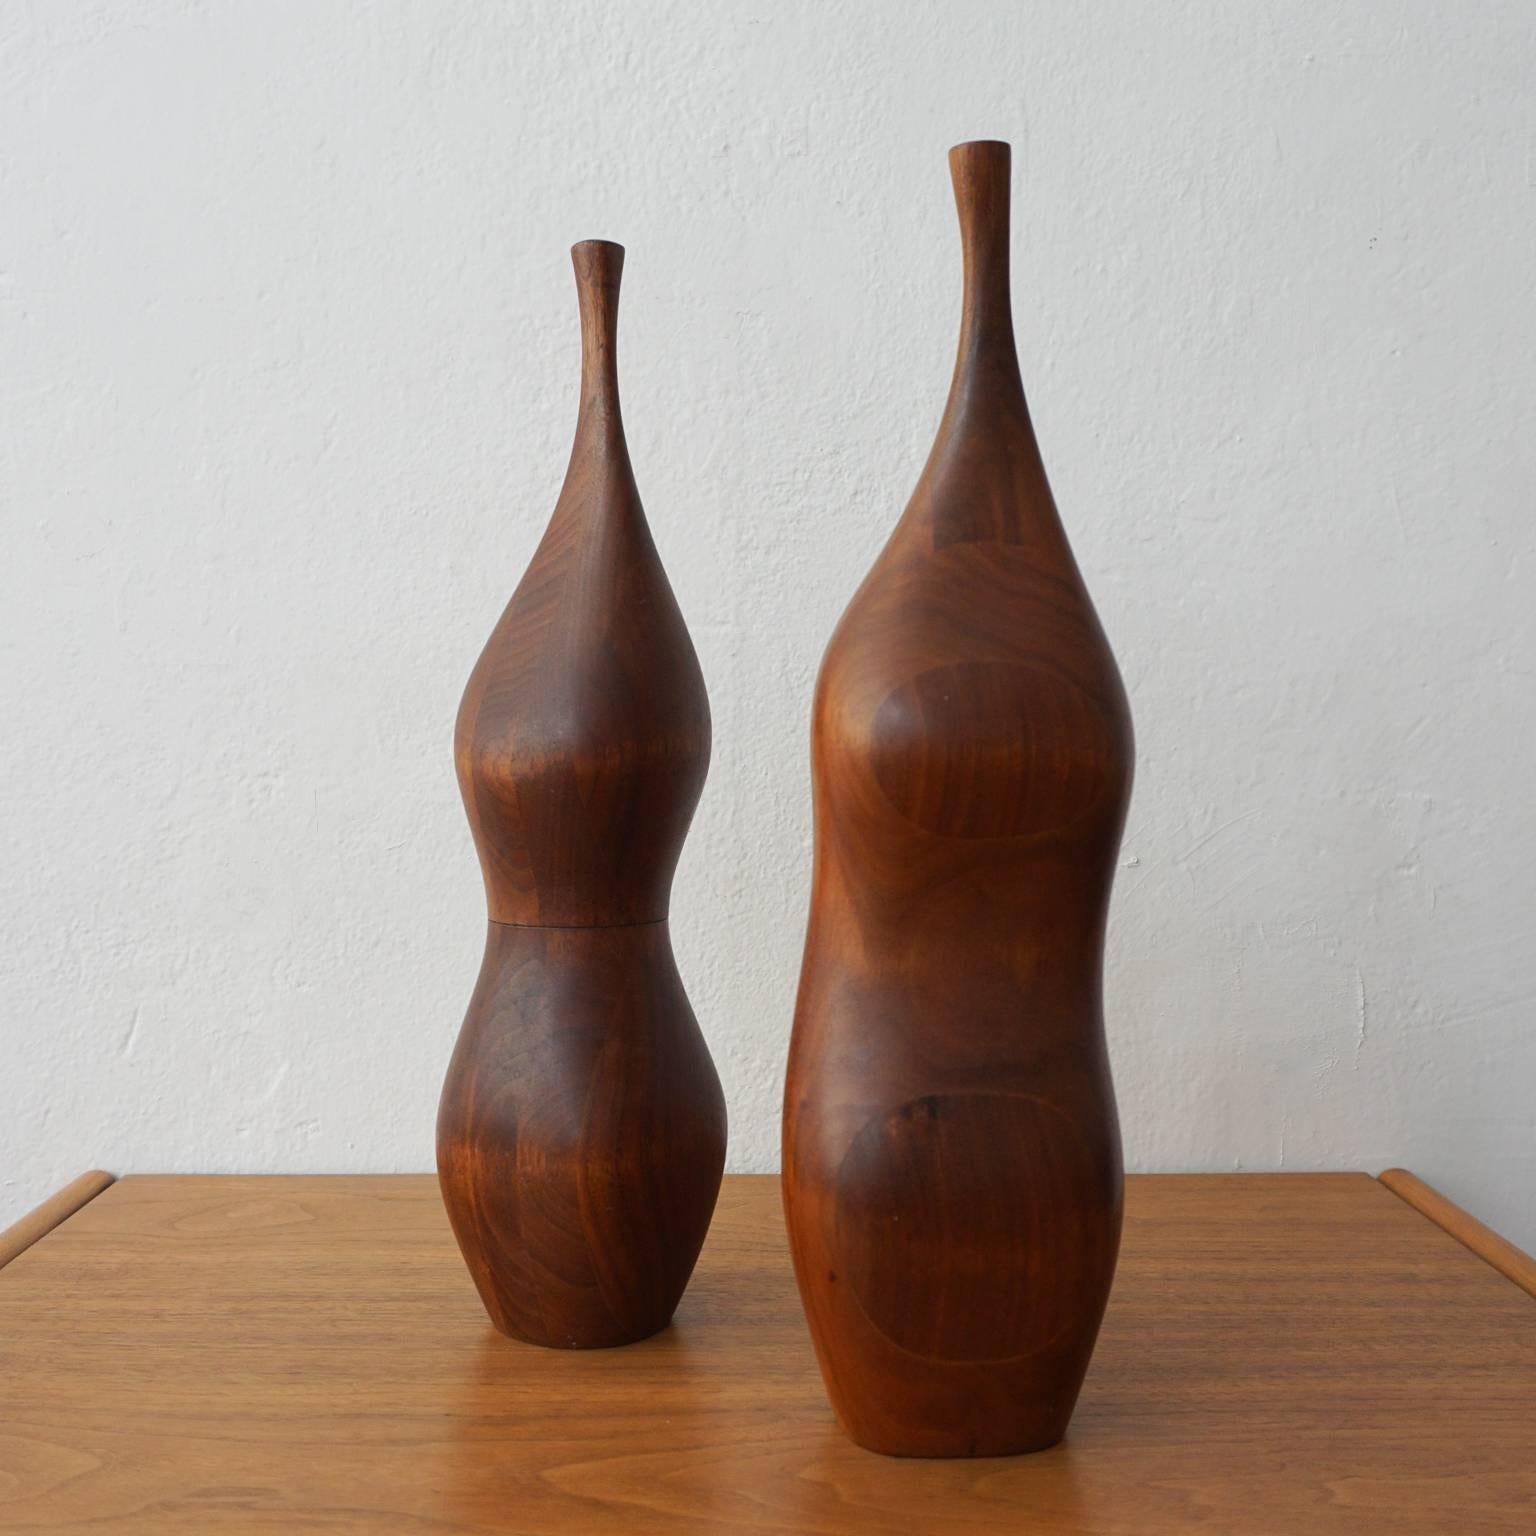 Impressive salt shaker and peppermill by American Craftsman, Daniel Loomis Valenza. Stacked laminate solid walnut construction. Fully functional, 1970s.

Valenza is a noted artist whose work was shown in the ground breaking exhibition, objects USA.